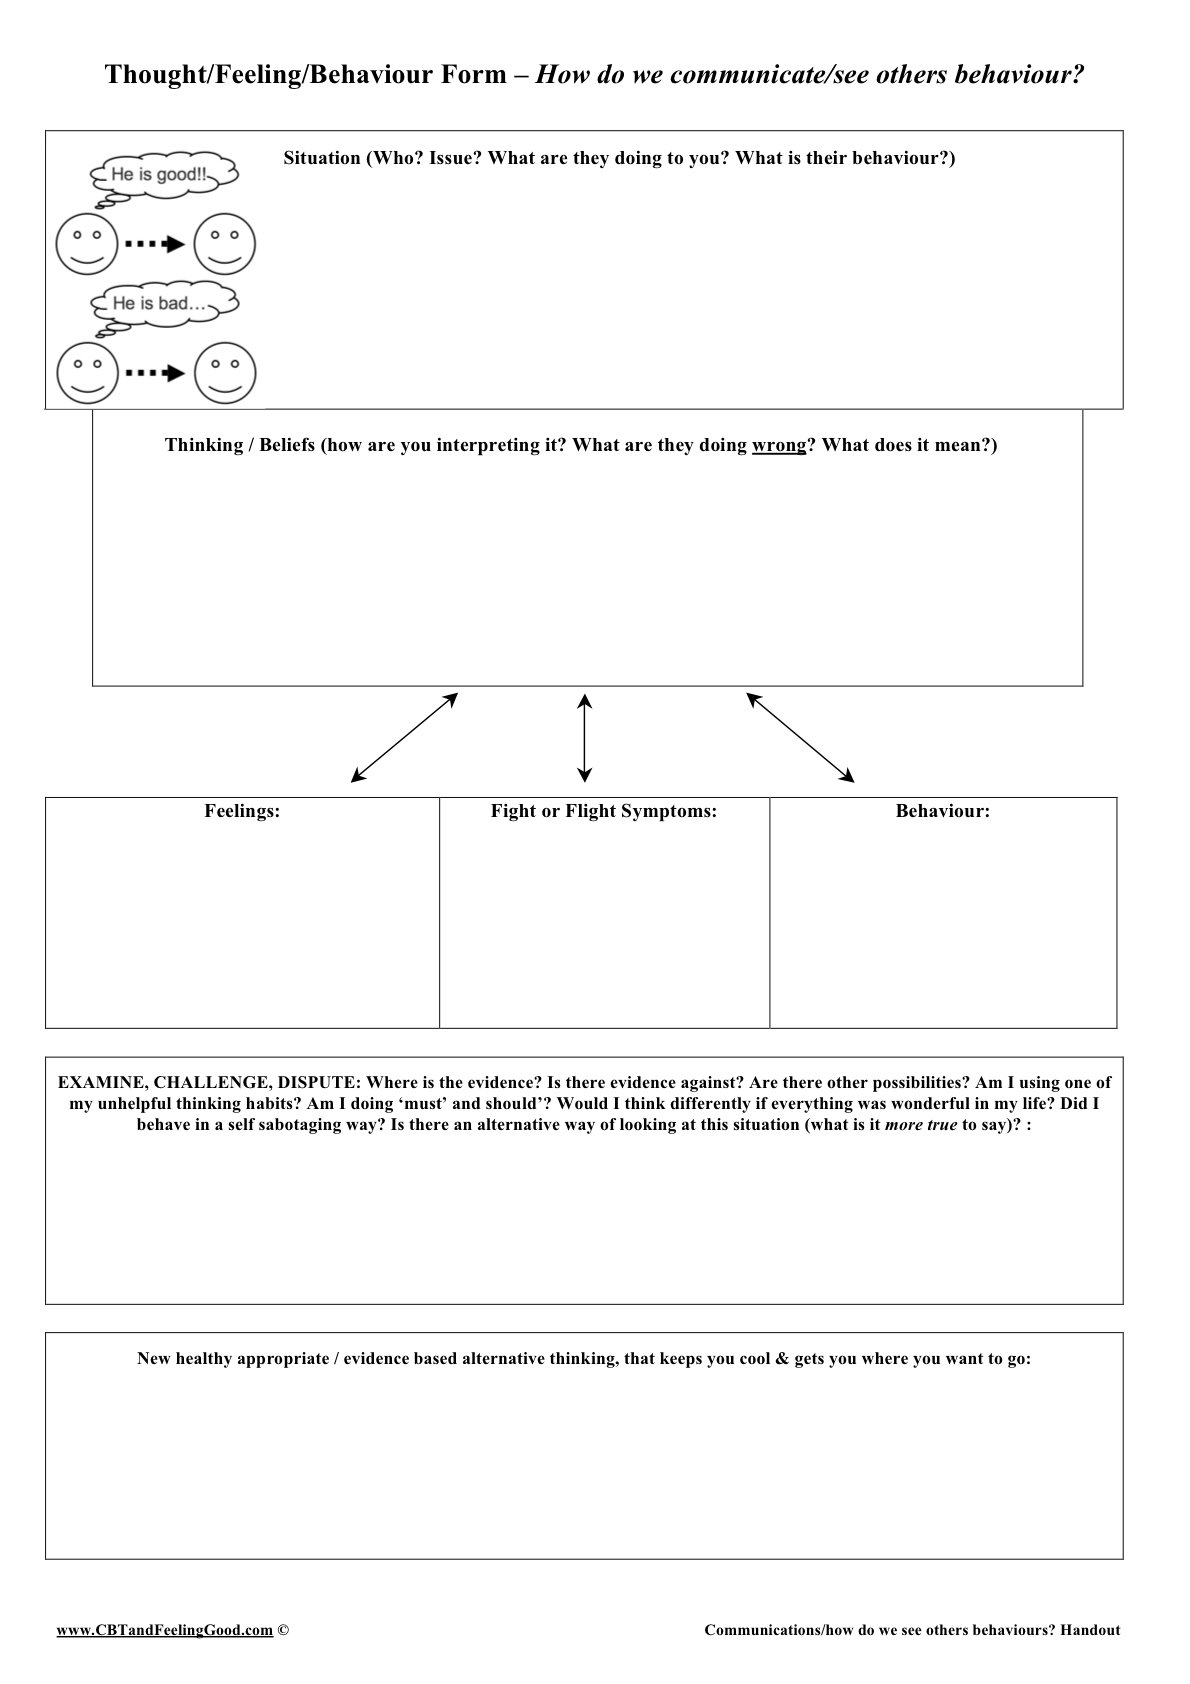 Cbt Dublin Ireland Worksheet – The Thoughtfeelingbehaviour Comms And Cbt Worksheets For Anxiety And Depression